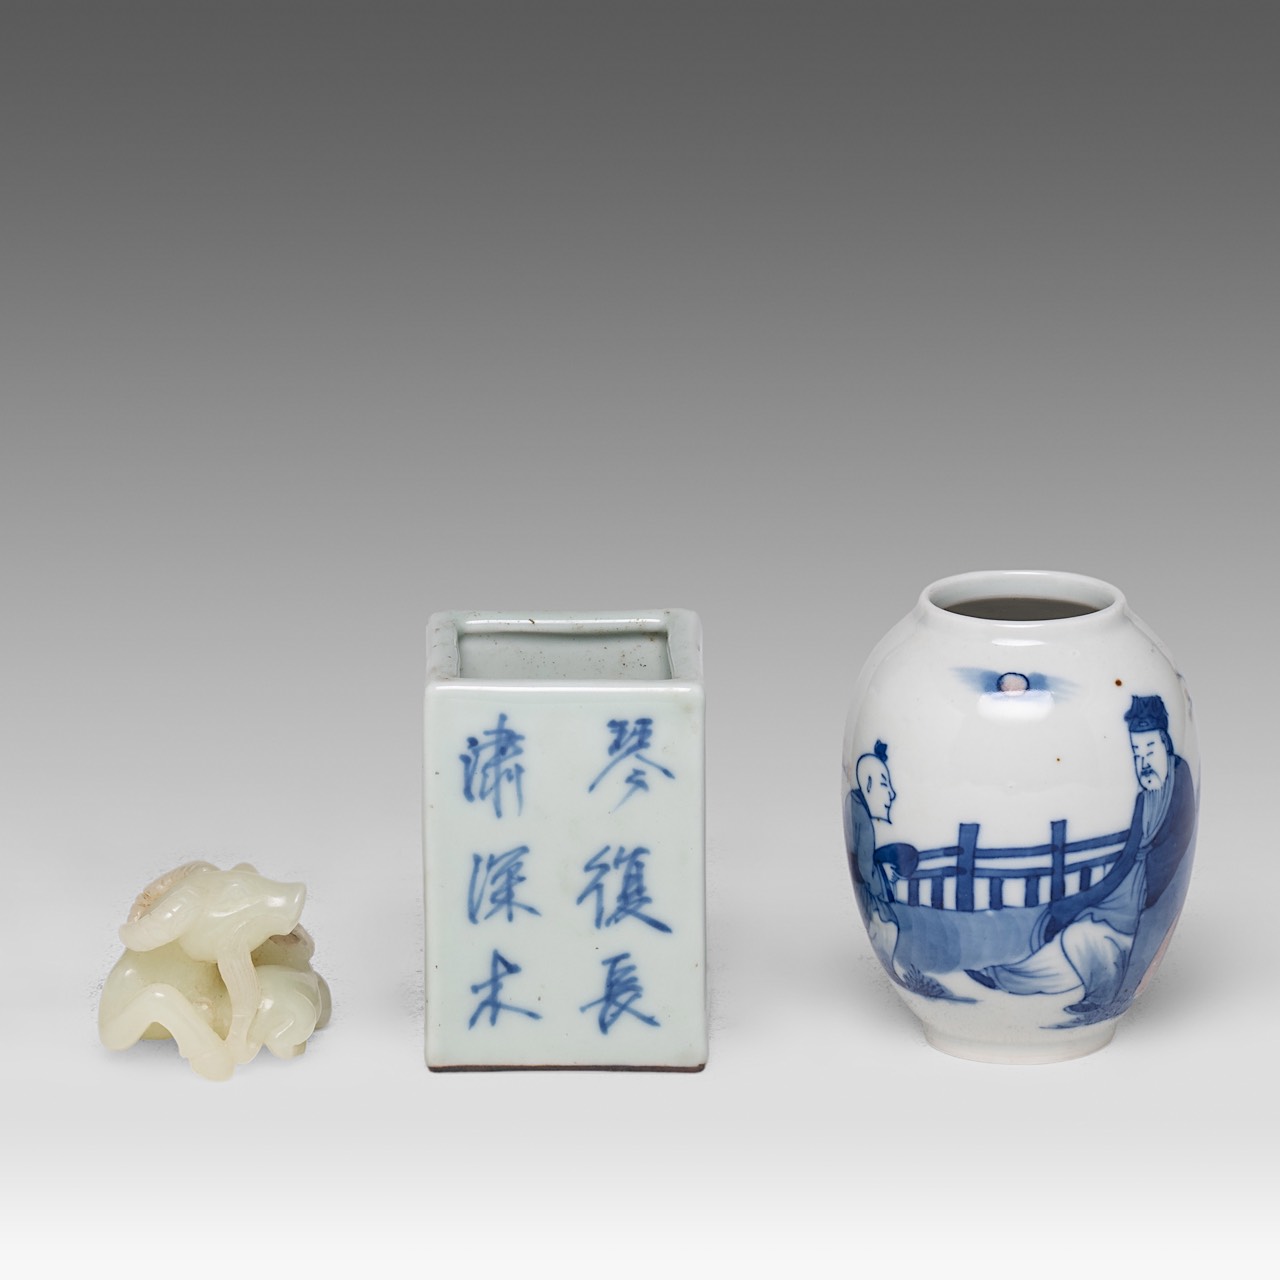 A collection of four Chinese scholar's objects, incl. a brush pot with inscriptions, late 18thC - ad - Image 5 of 29